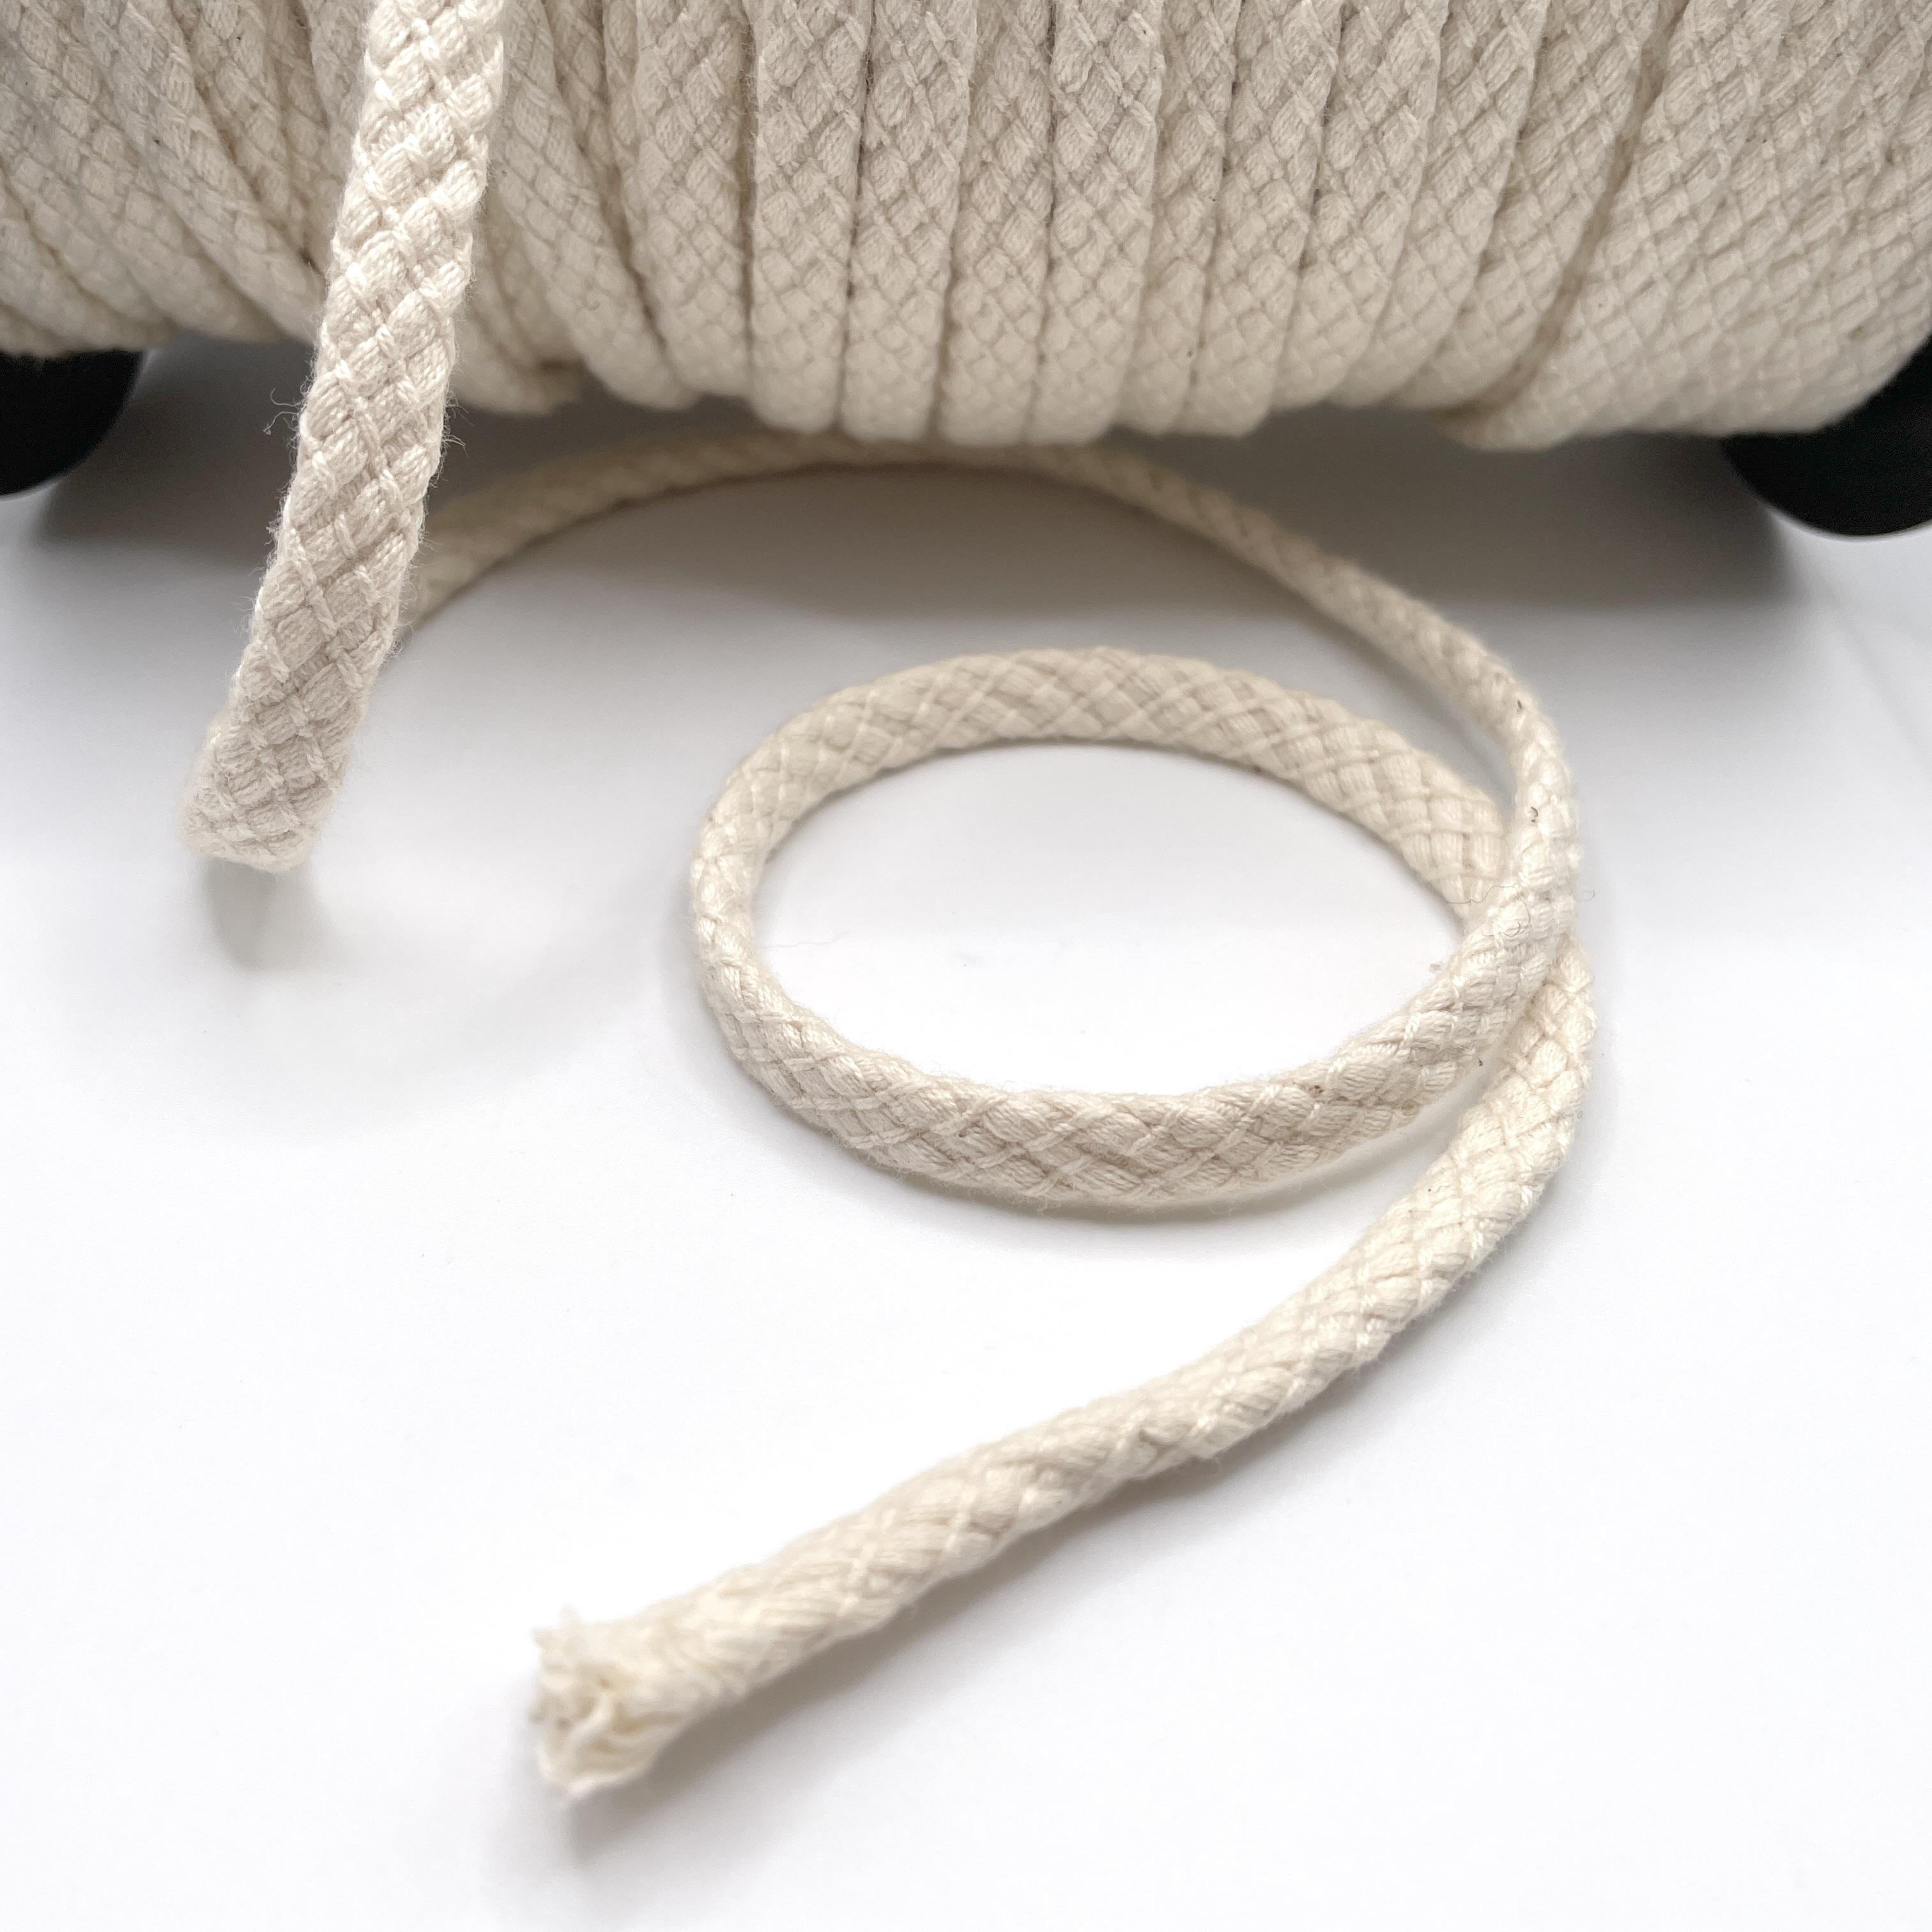 Drawstring Cord - For Lacing/Hoodies/Joggers etc - Tubular Woven 100%  cotton - 8mm wide (3mm thick), NATURAL (Cream)